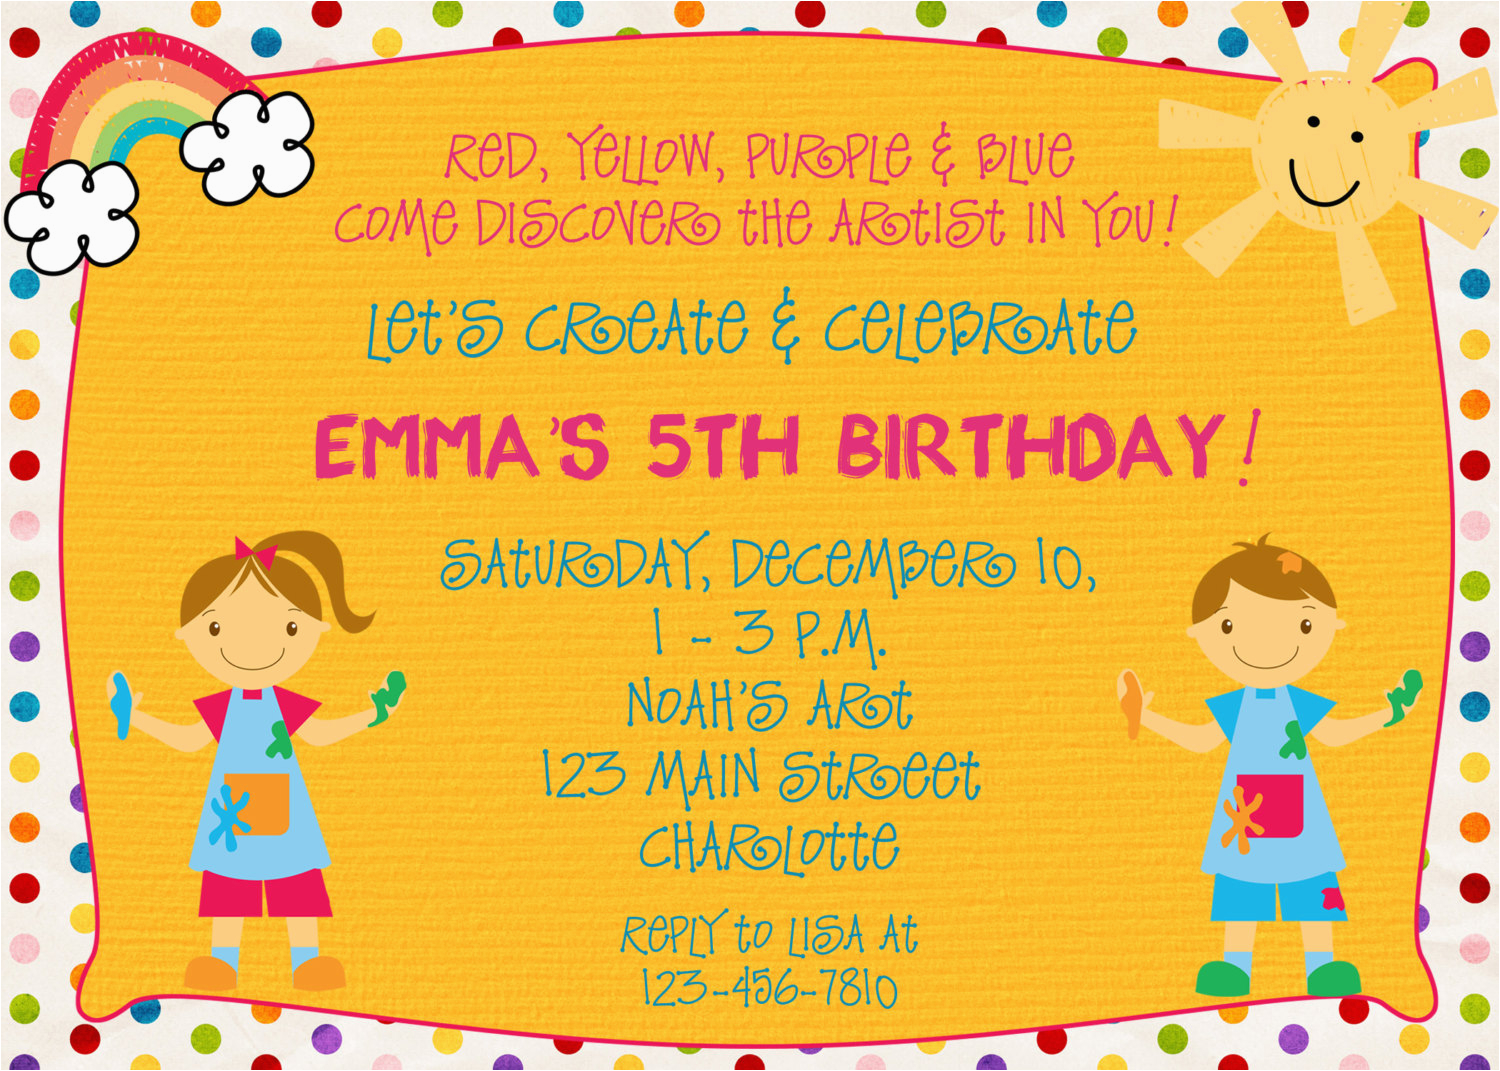 Arts and Crafts Birthday Party Invitations Arts and Crafts Birthday Party Invitations Free